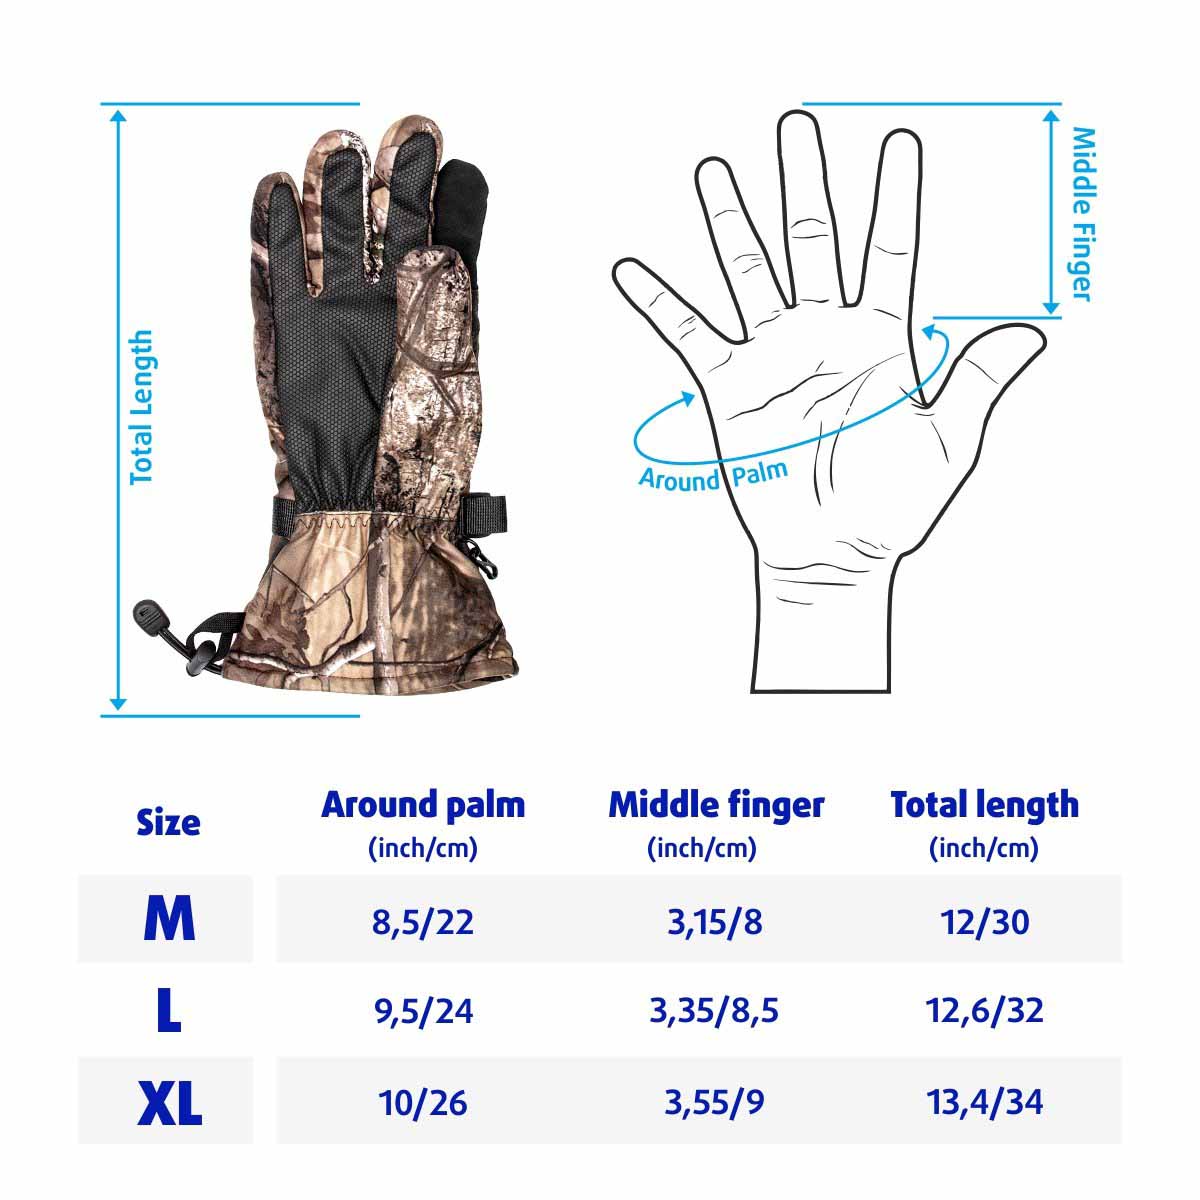 Hollow Fiber Insulated Waterproof Gloves for Men are available in M, L and XL sizes